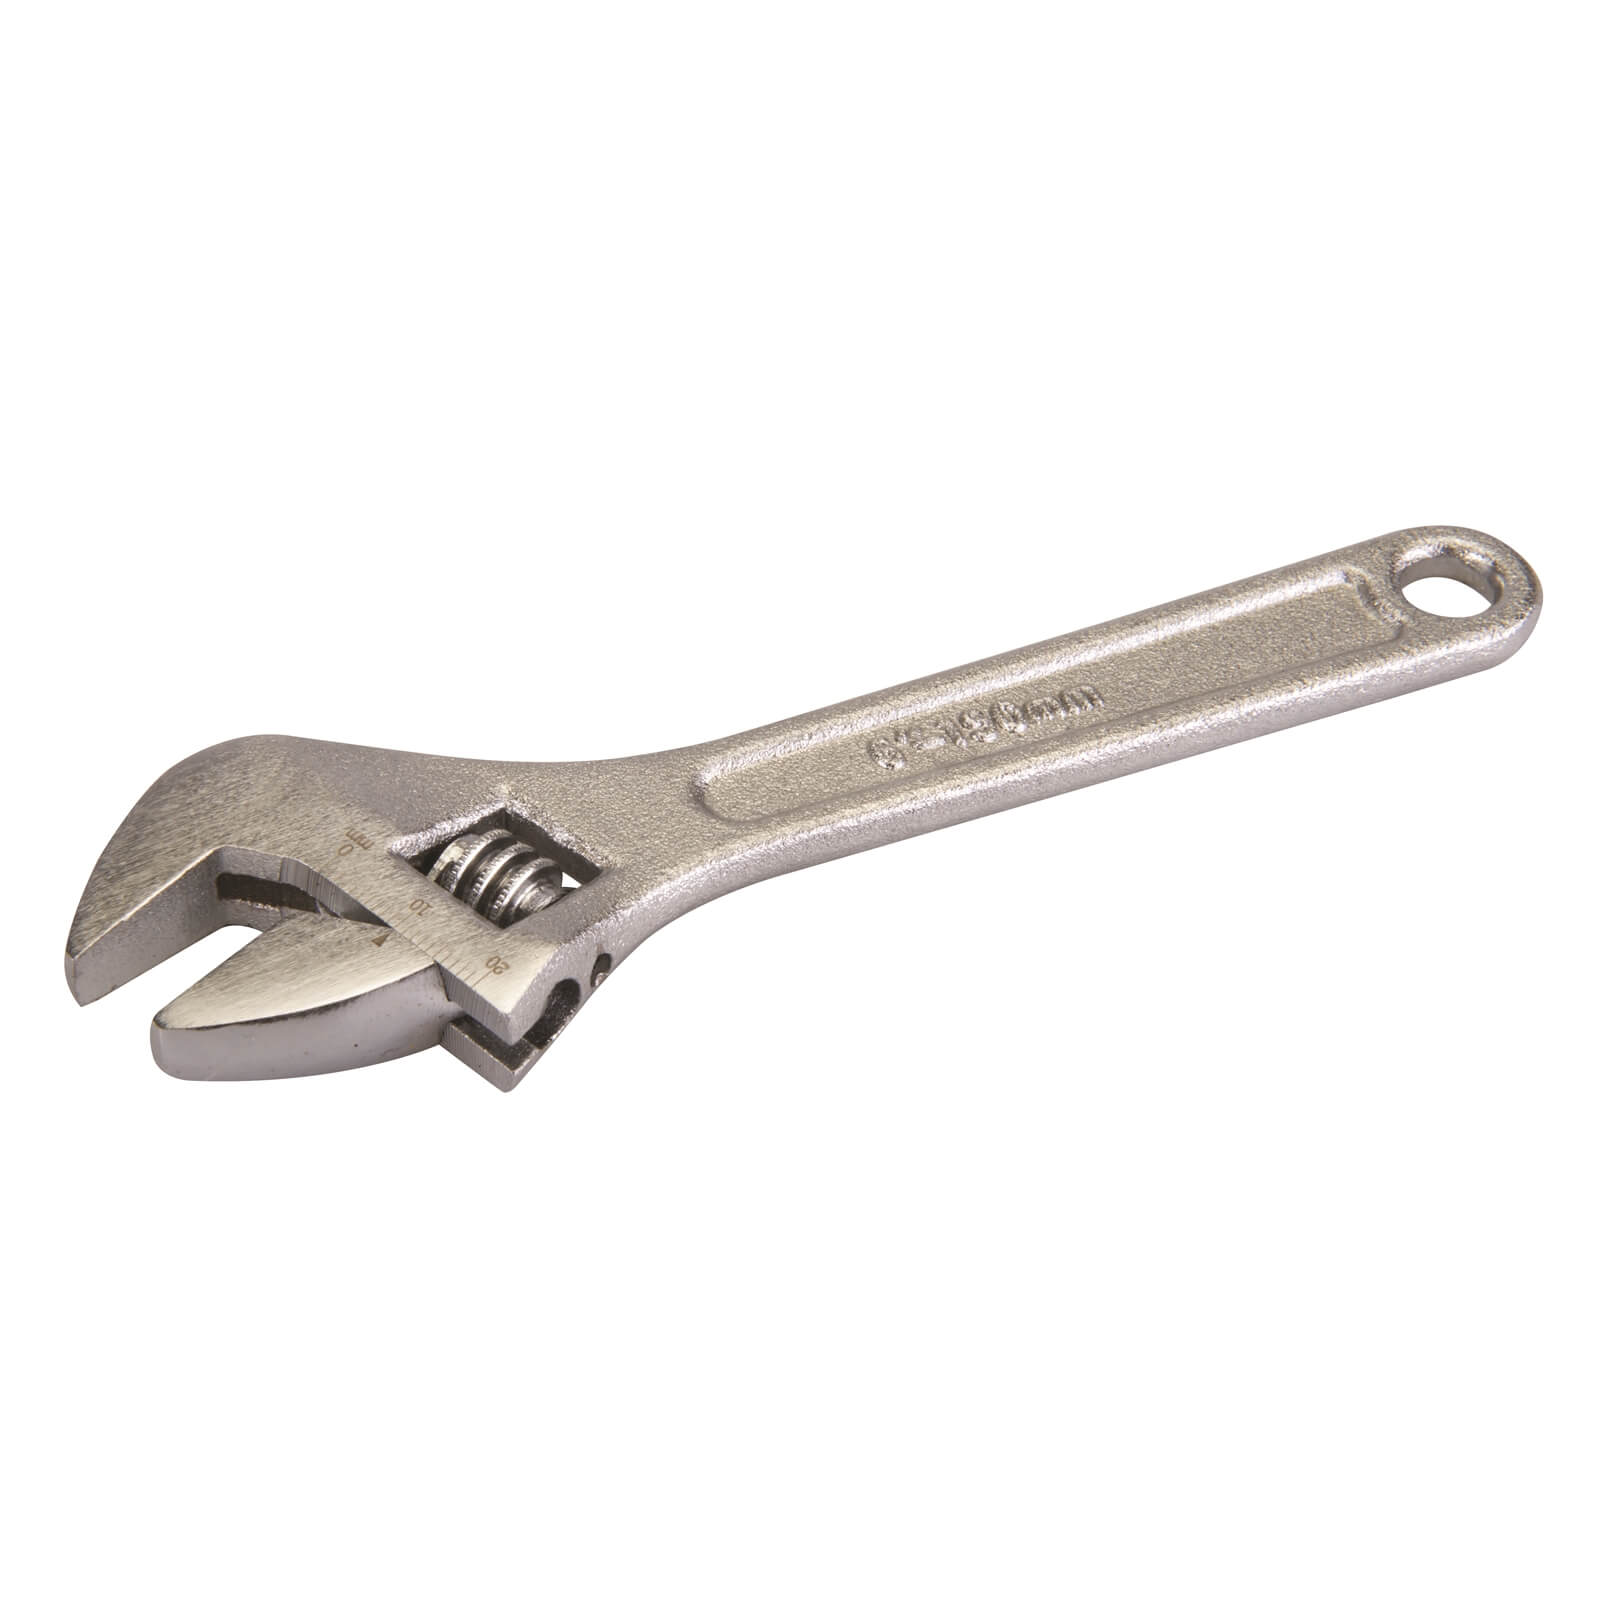 Silverline Adjustable Wrench Length 150mm Jaw 17mm